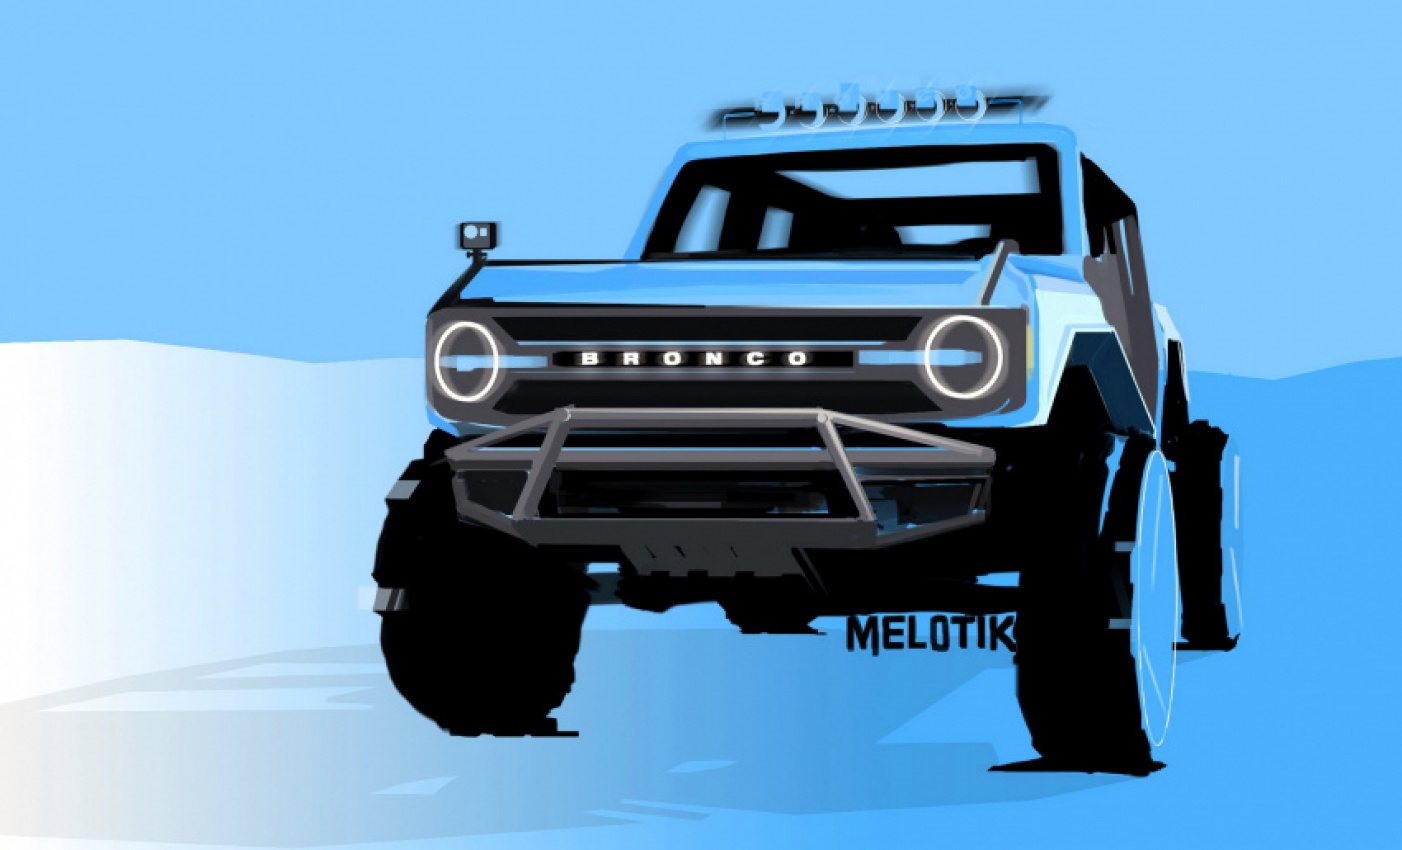 autos, cars, ford, hp, news, ford bronco, ford videos, galleries, new cars, video, 2022 ford bronco raptor bows with over 400hp for extreme off-roading at $68,500